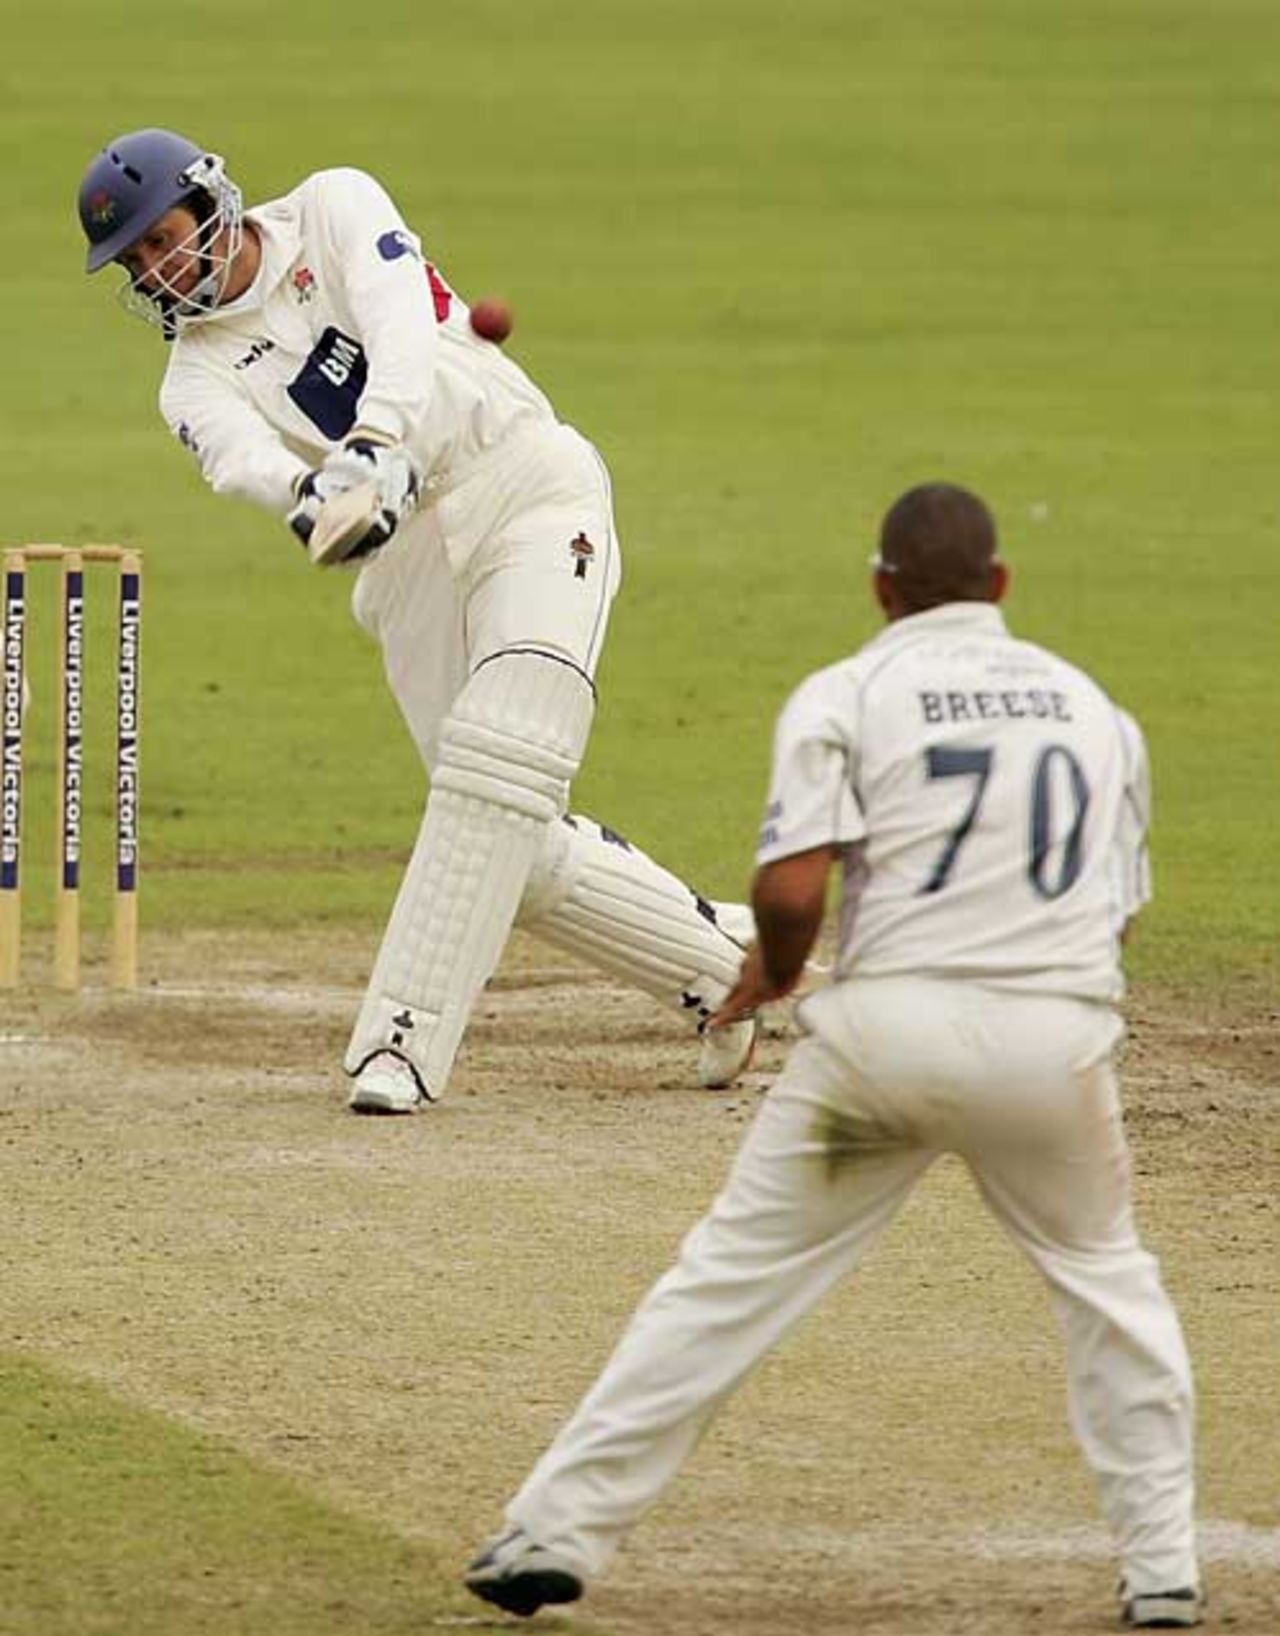 Dominic Cork comes down the pitch, Lancashire v Durham, County Championship, Old Trafford, September 16, 2006